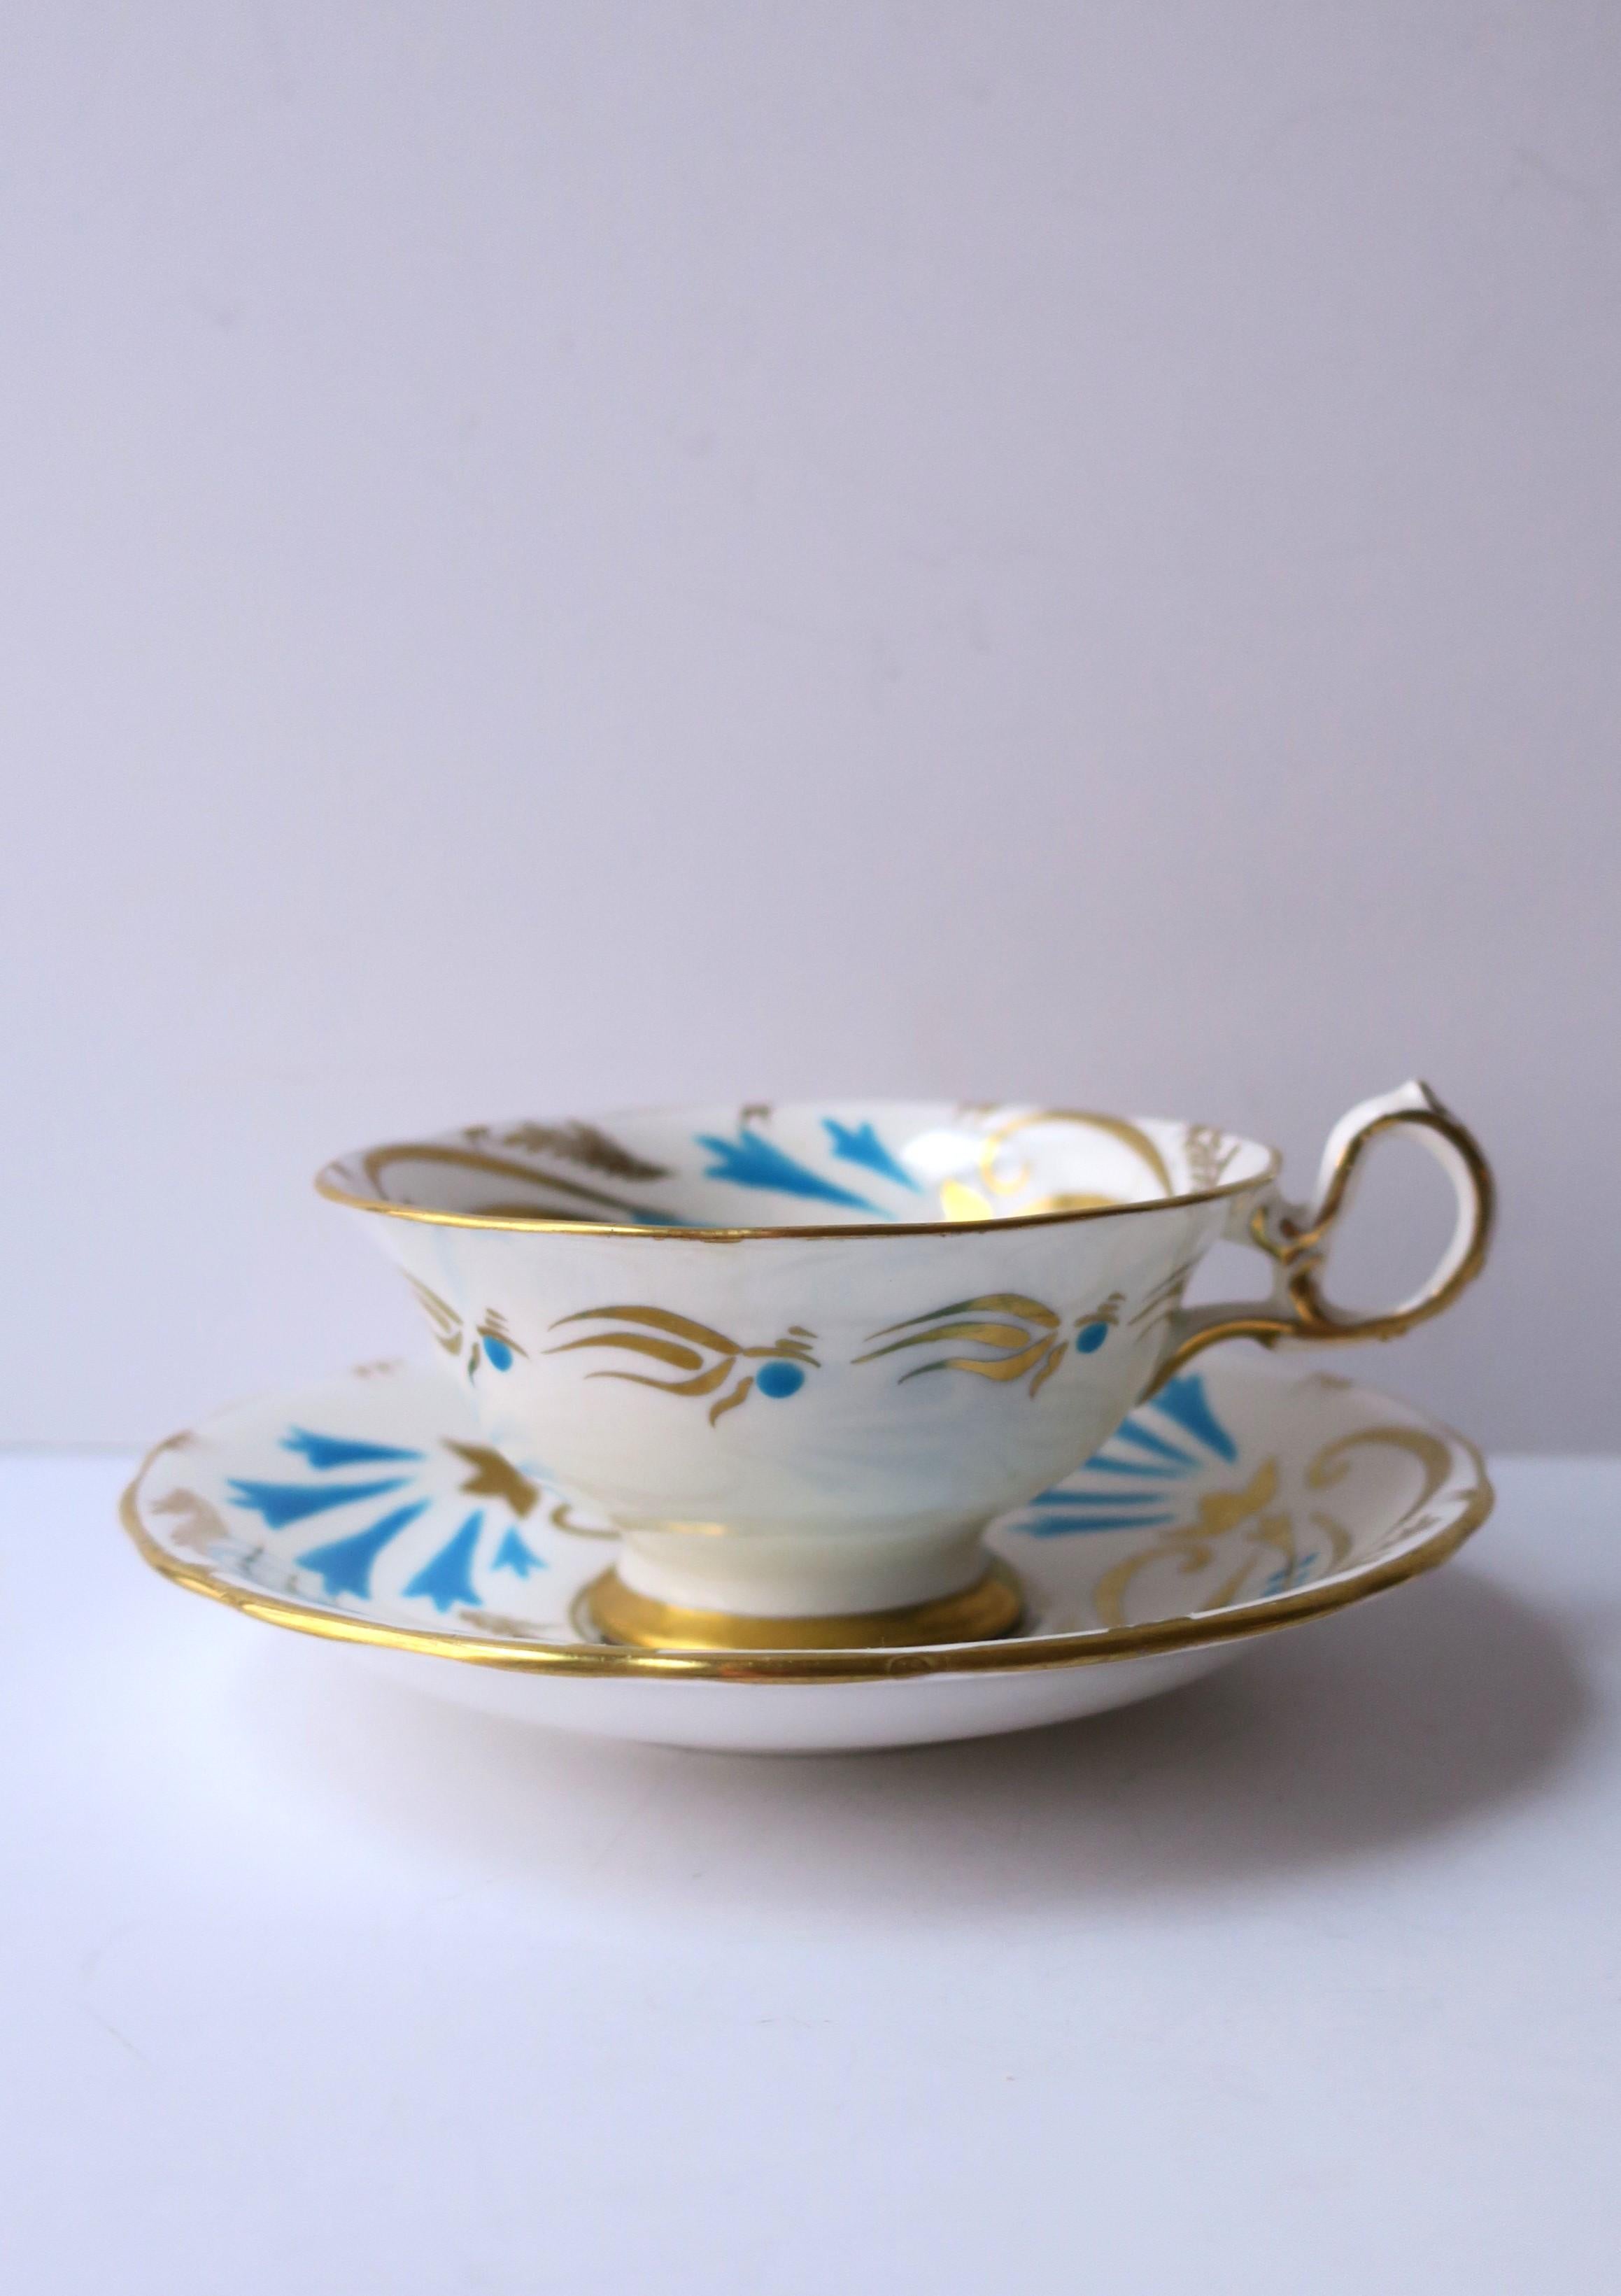 Royal Chelsea Porcelain Coffee or Tea Cup and Saucer with Bird Design For Sale 1